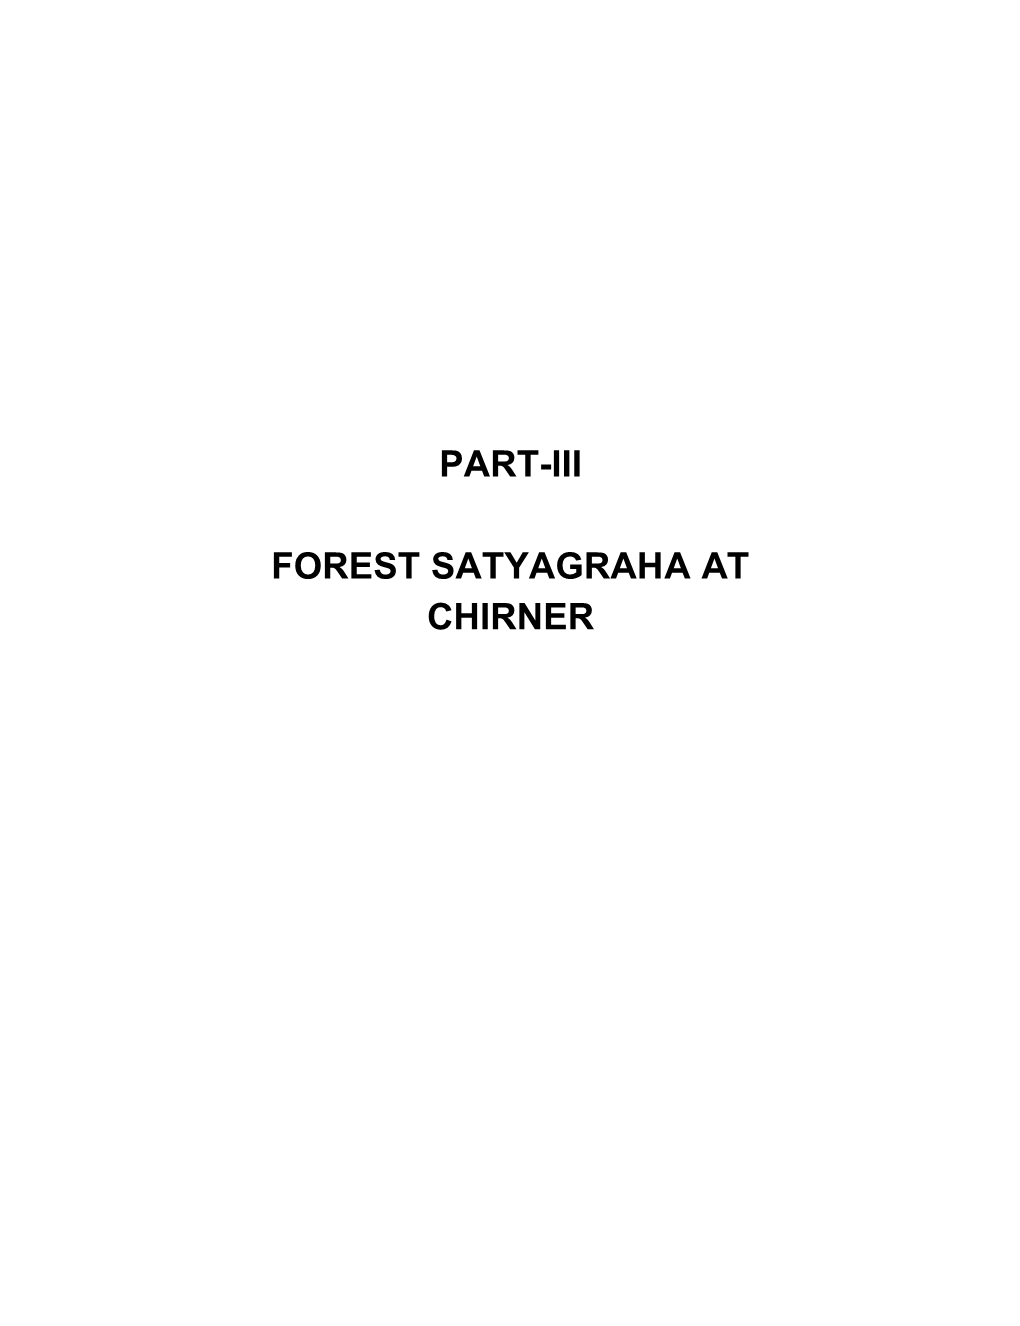 PART-III Forest Satyagraha at Chirner